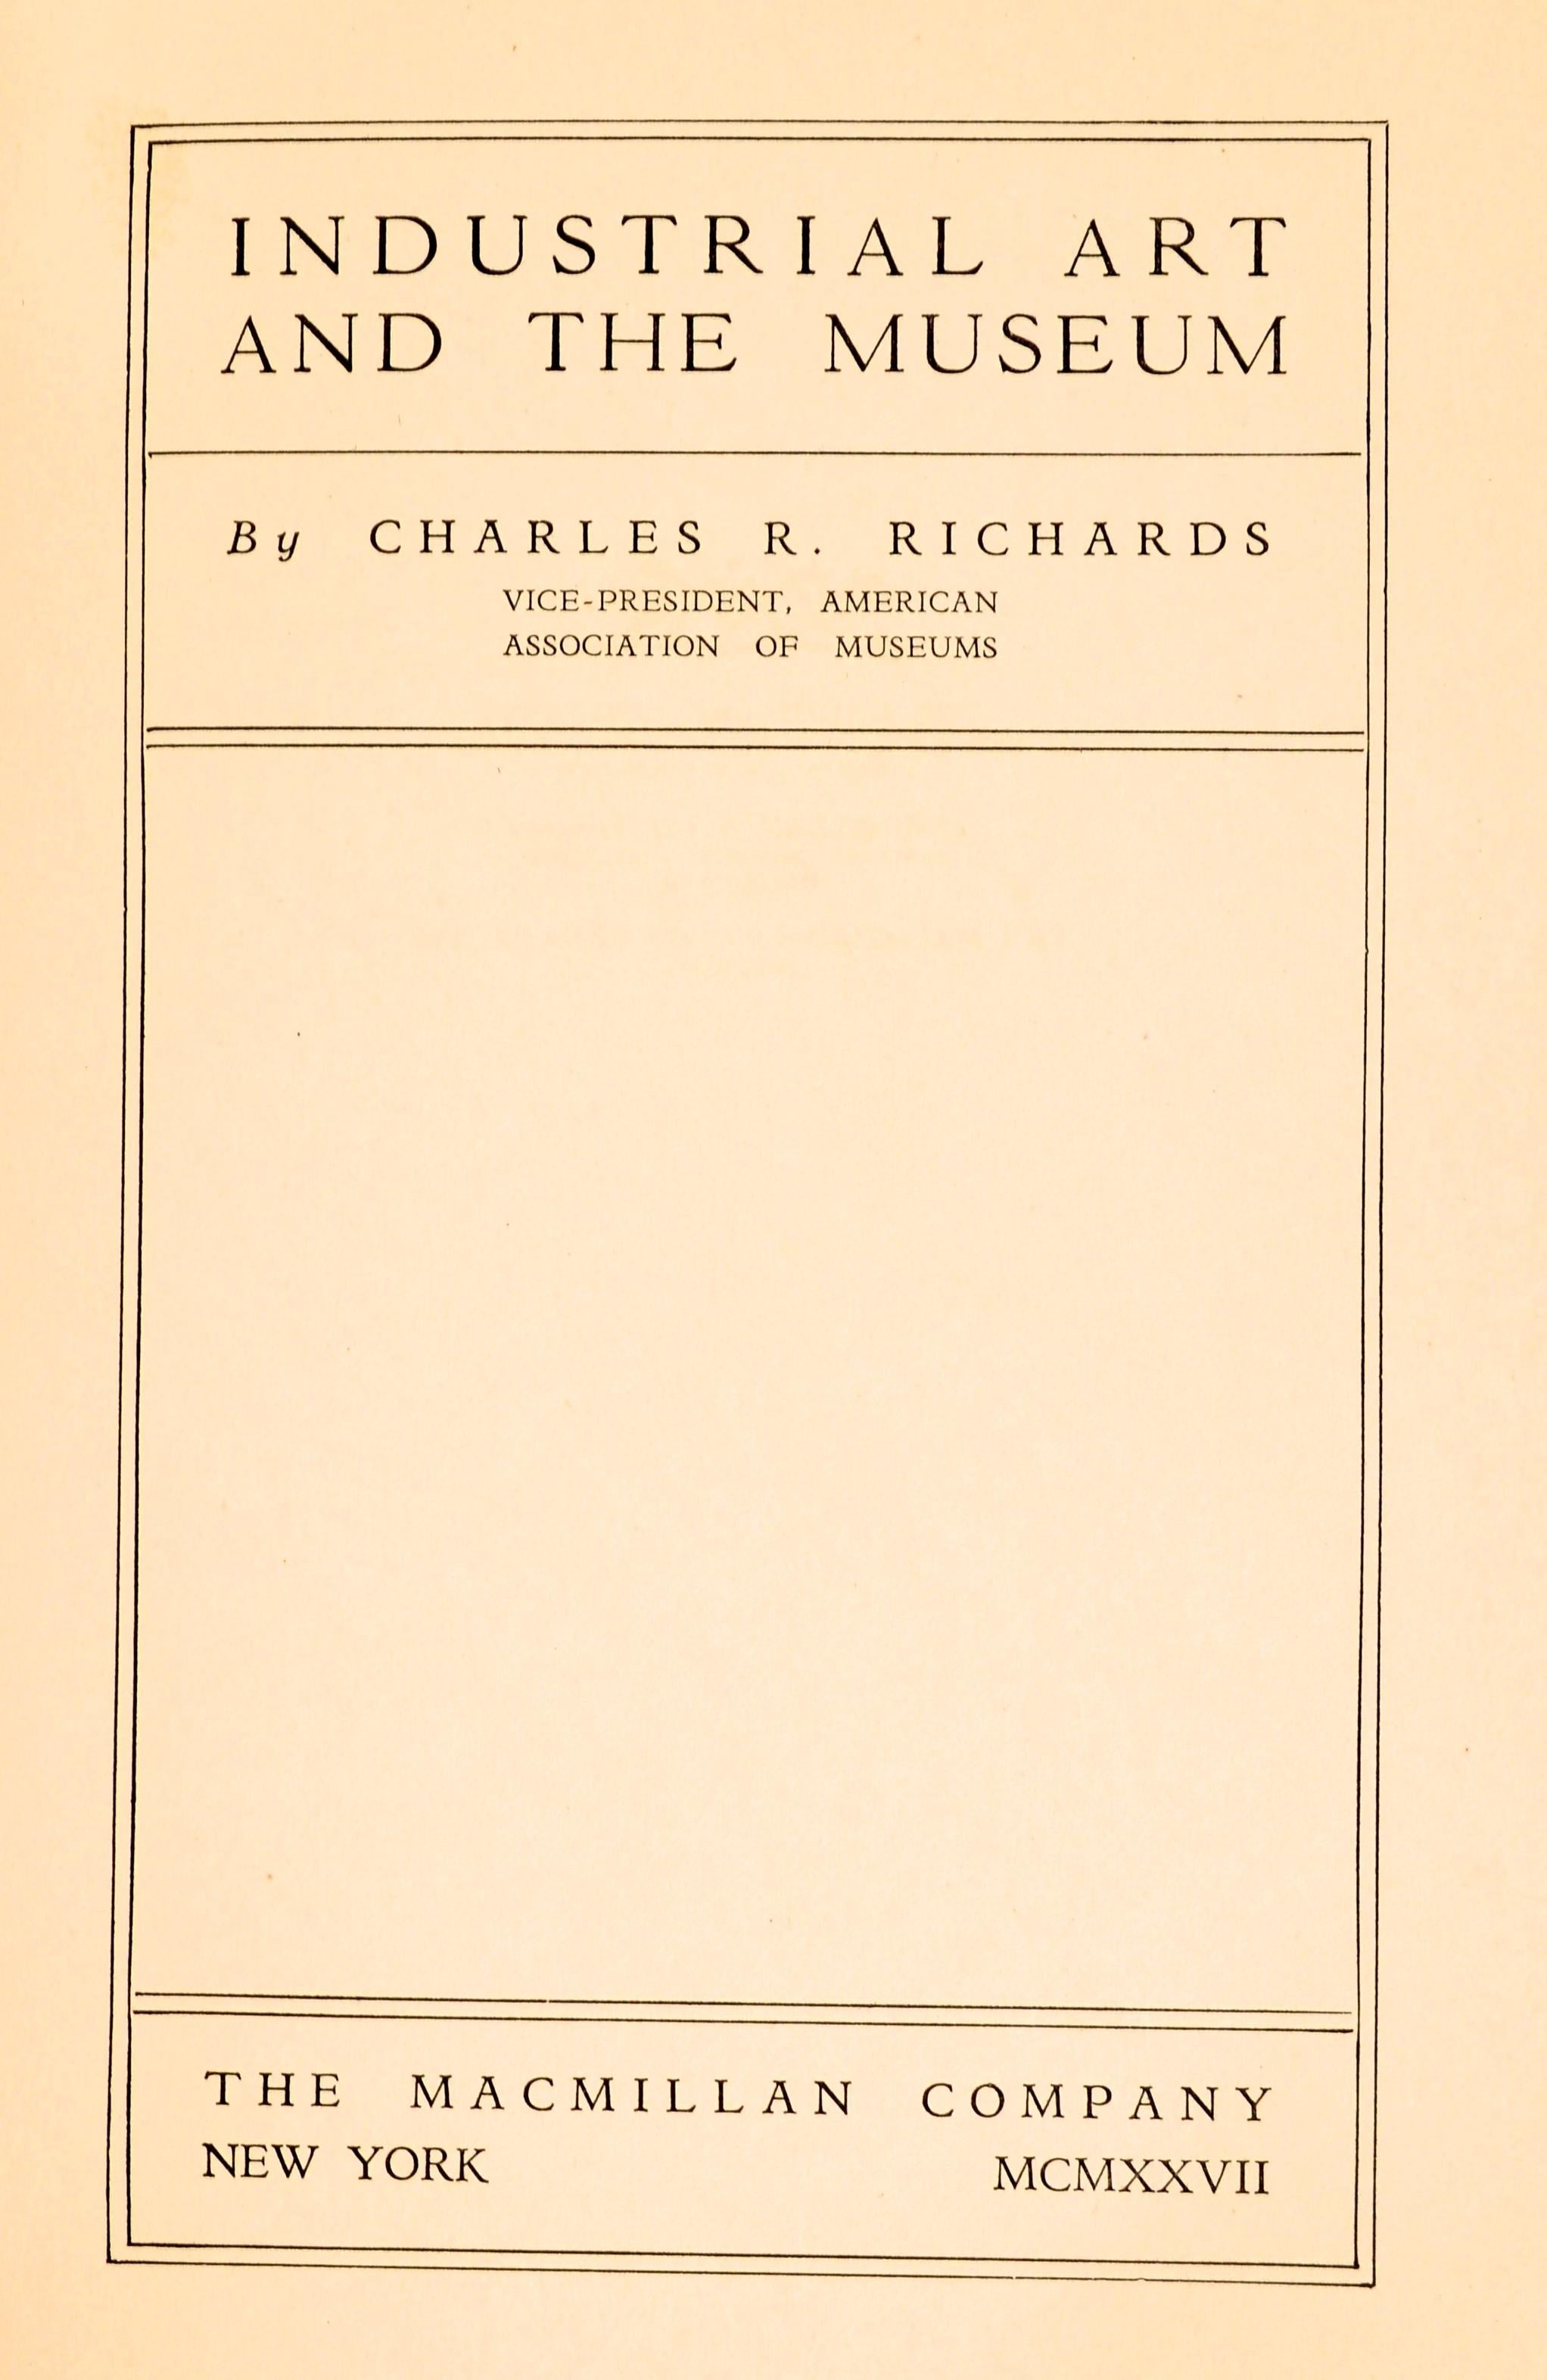 Industrial Art and the Museum by Charles R. Richards. 1st Ed hardcover published by The Macmillan Company, 1927. Including: Industrial Art Museums of Germany (München, Hess. Landesmuseum Darmstadt, Kunstgewerbemuseum Flensburg, Thaulow-Museum Kiel,